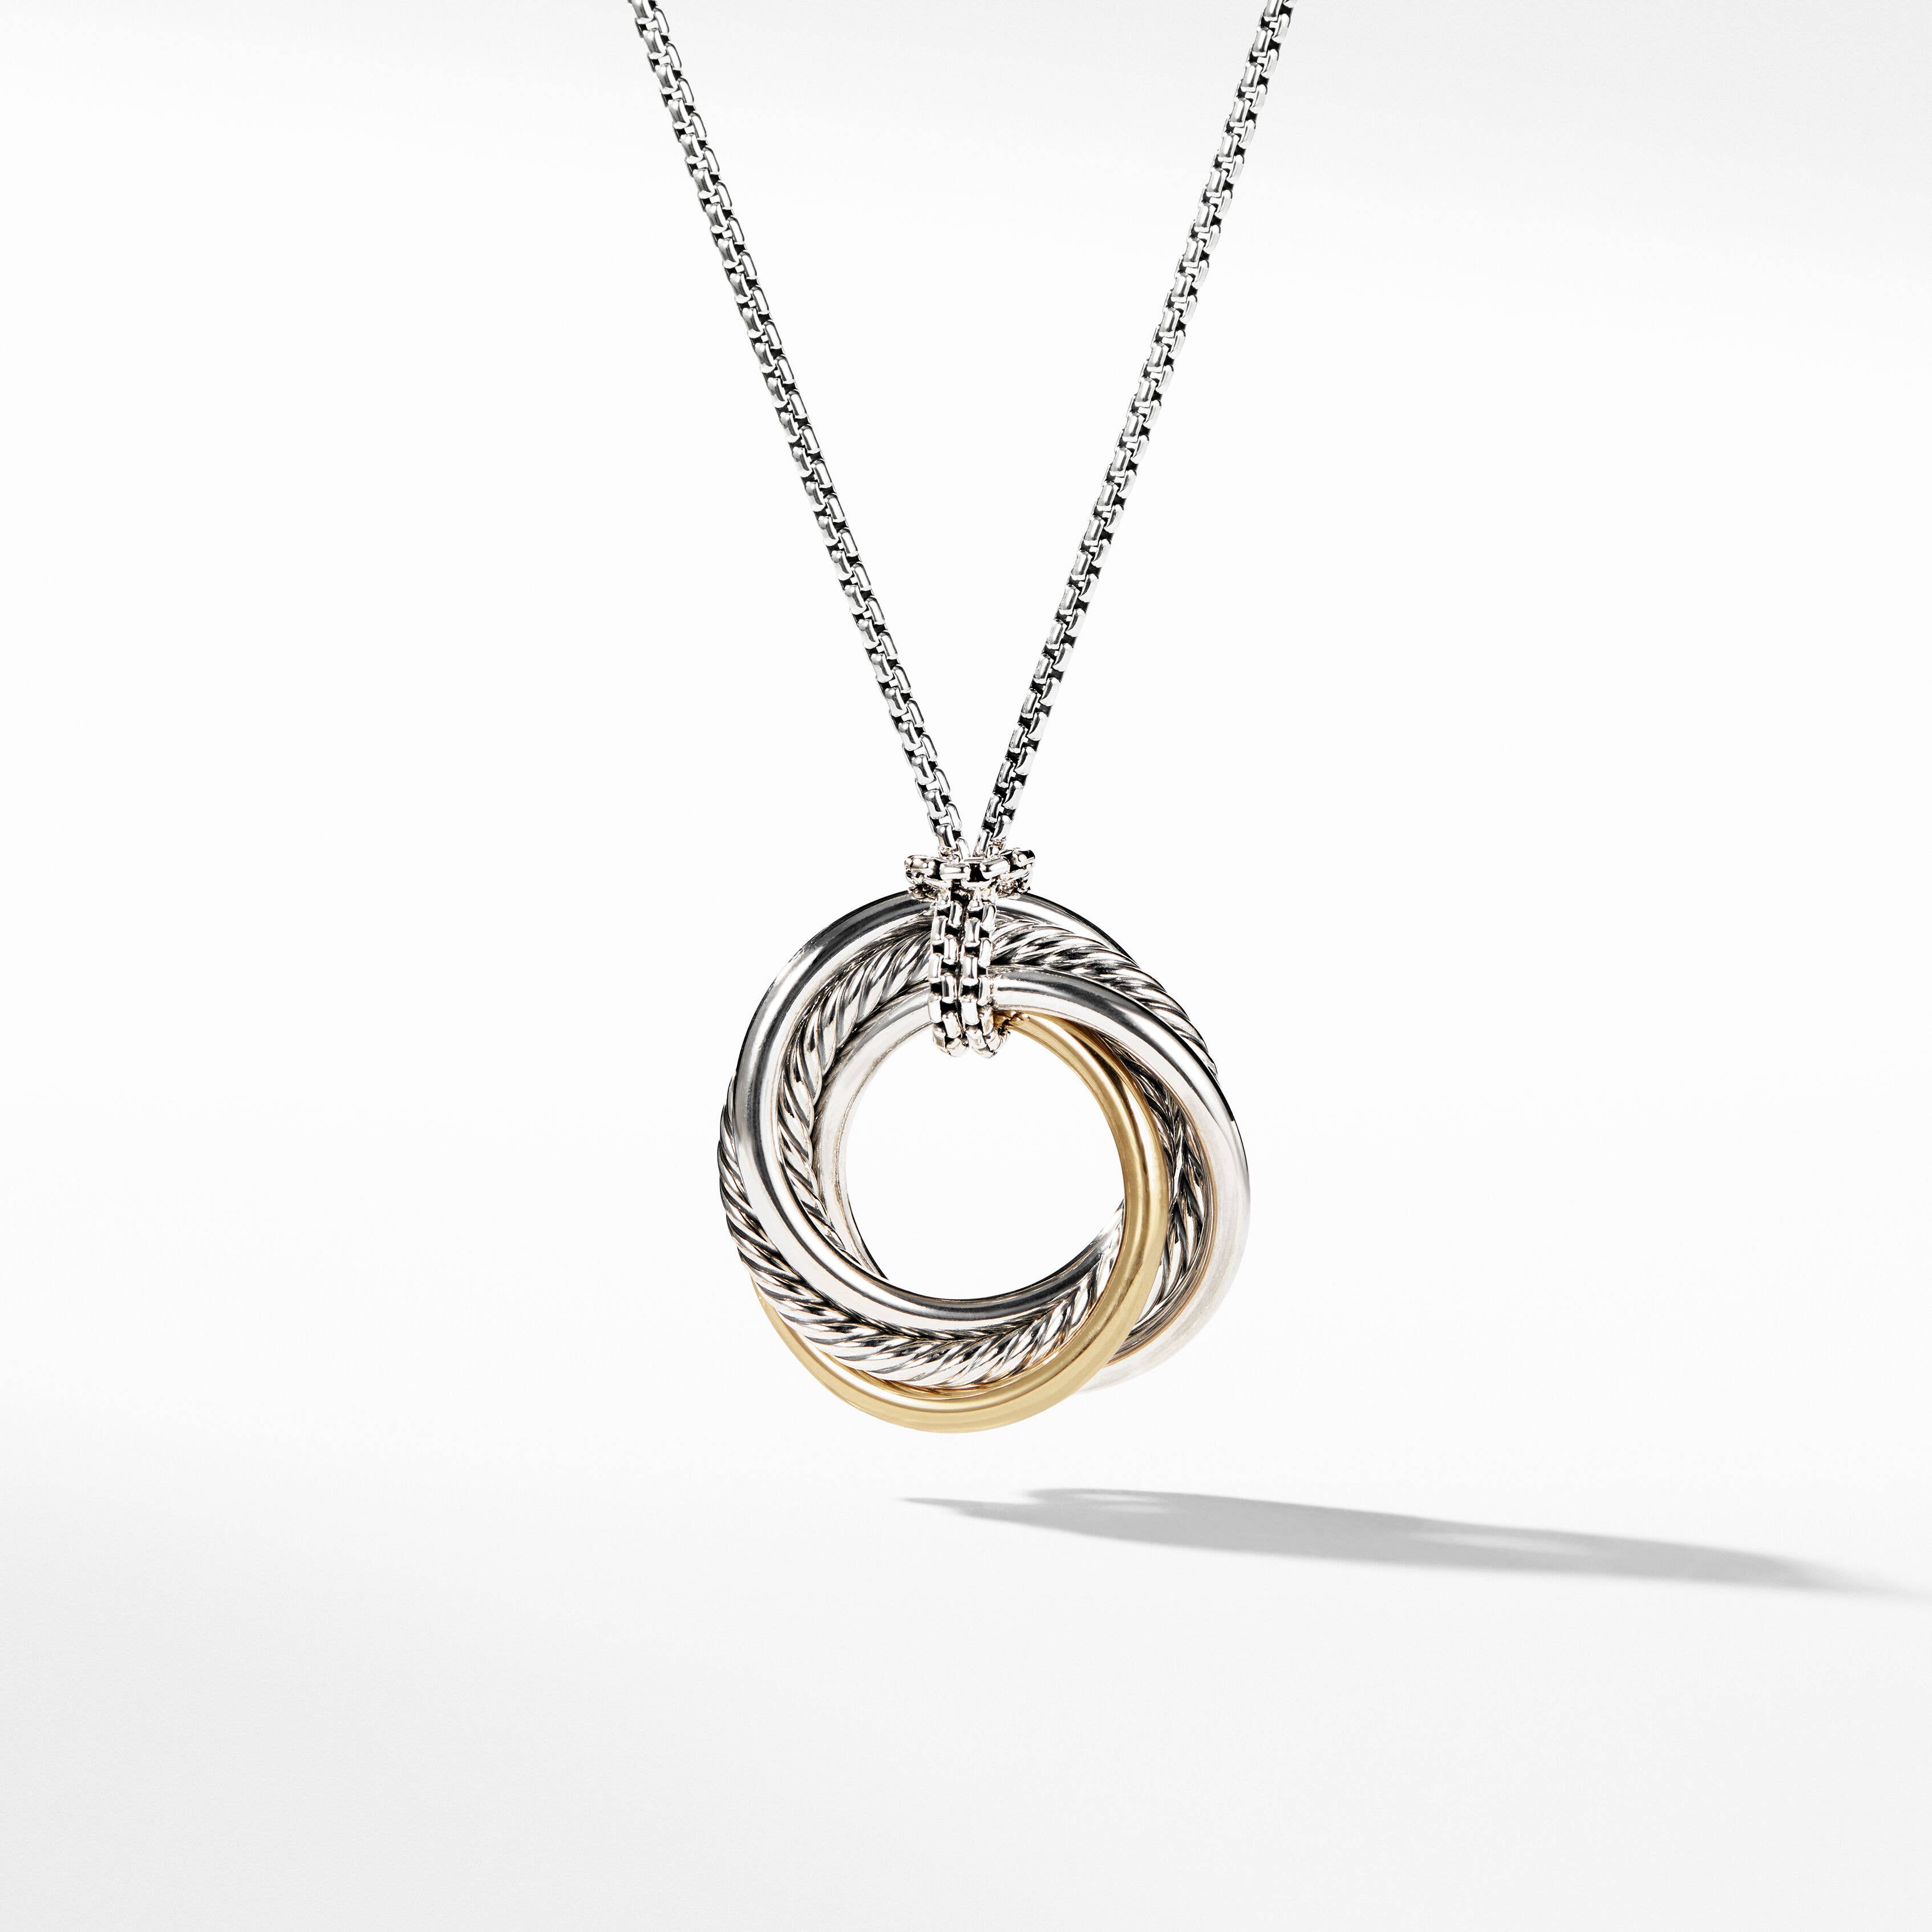 Crossover Pendant Necklace in Sterling Silver with 14K Yellow Gold